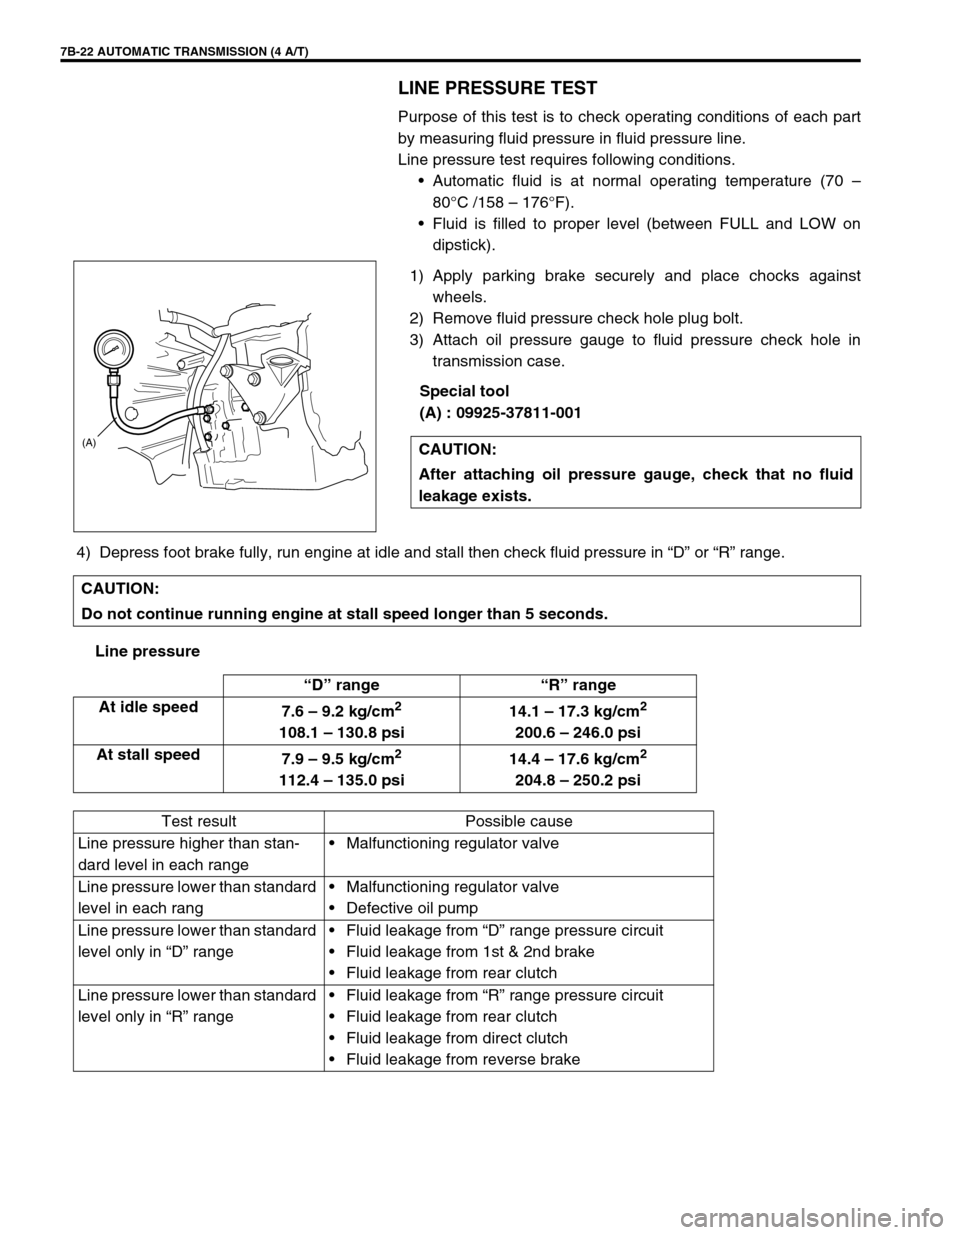 SUZUKI SWIFT 2000 1.G Transmission Service Workshop Manual 7B-22 AUTOMATIC TRANSMISSION (4 A/T)
LINE PRESSURE TEST
Purpose of this test is to check operating conditions of each part
by measuring fluid pressure in fluid pressure line.
Line pressure test requir